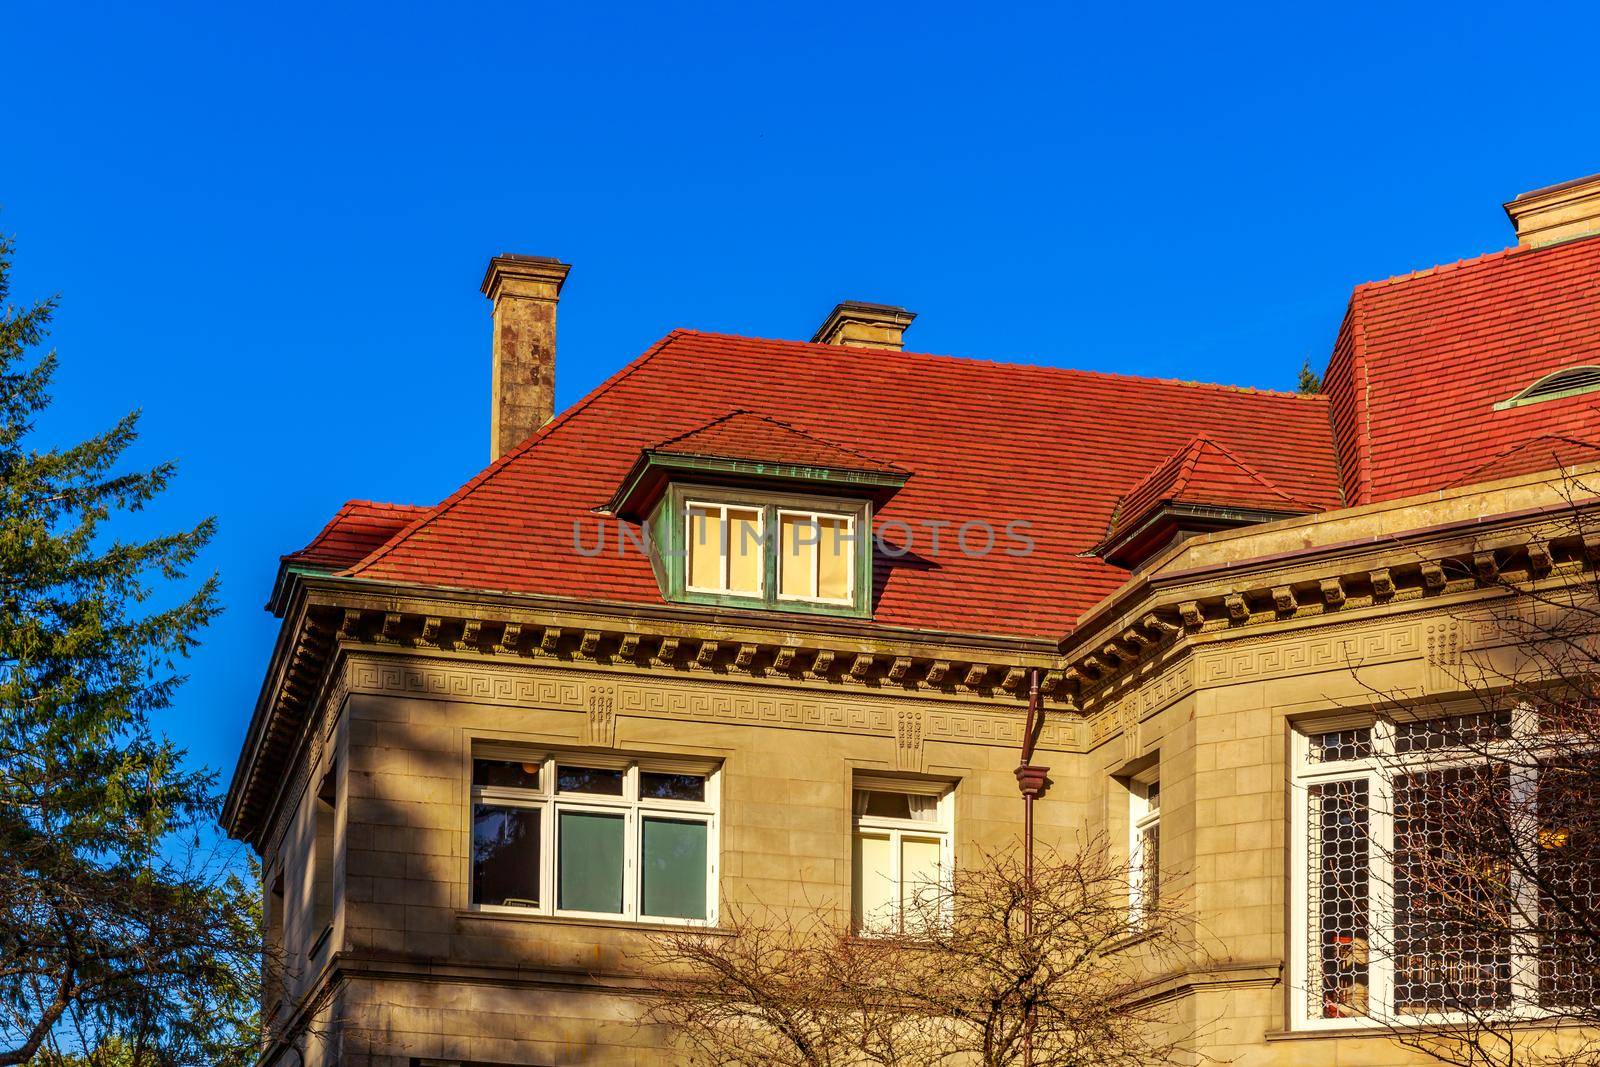 Portland, Oregon, USA - February 25, 2016: Originally built in 1909, Pittock mansion is a French Renaissance-style chateau in the West Hills of Portland, Oregon.